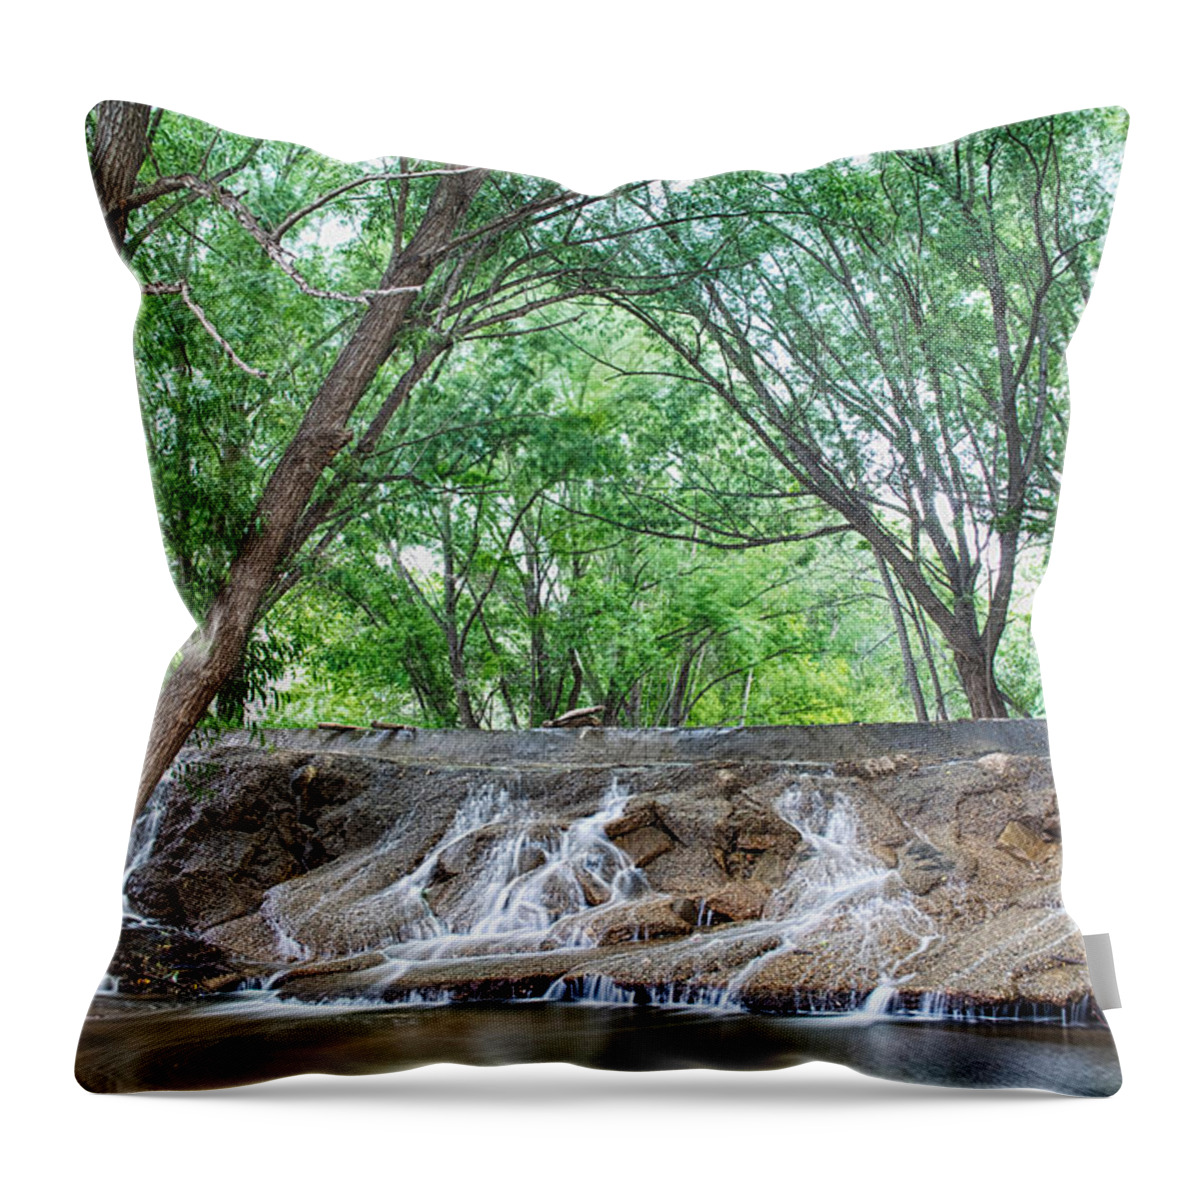 Waterfall Throw Pillow featuring the photograph Cascading Waterfall by James BO Insogna